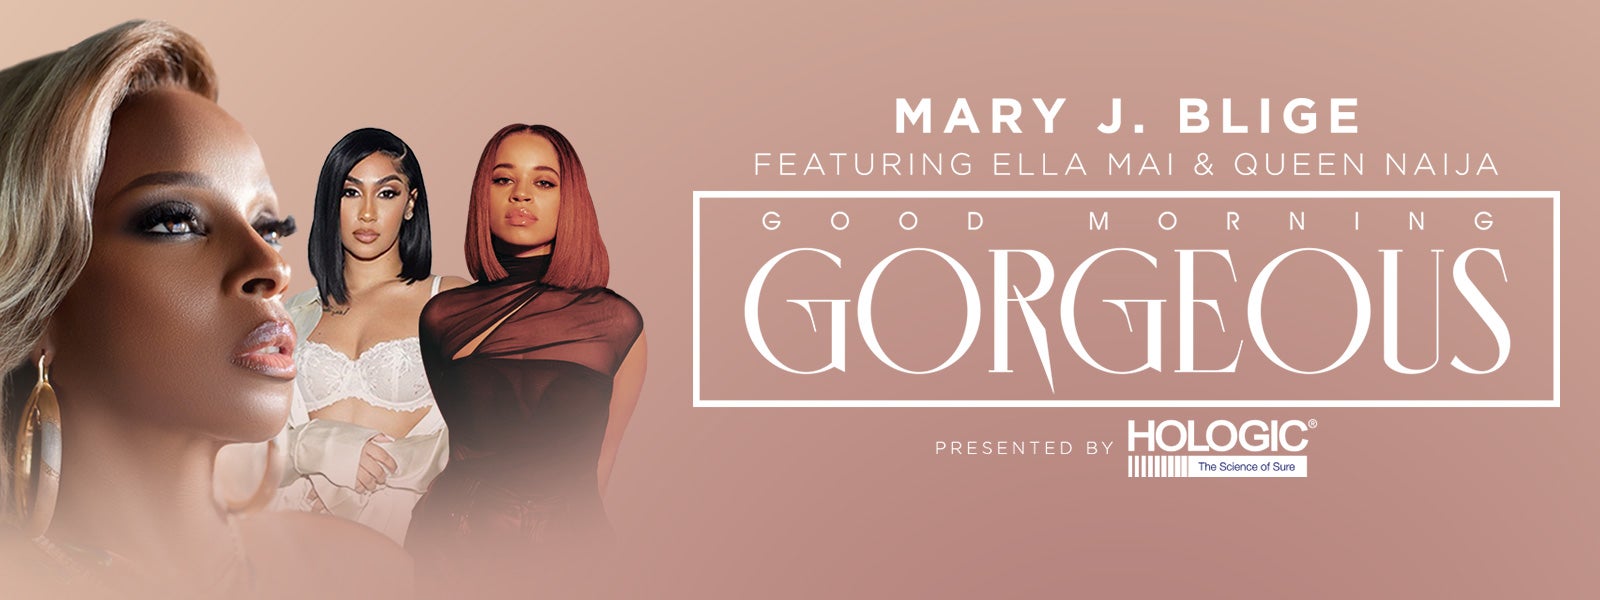 Mary J. Blige: Good Morning Gorgeous Tour presented by Hologic